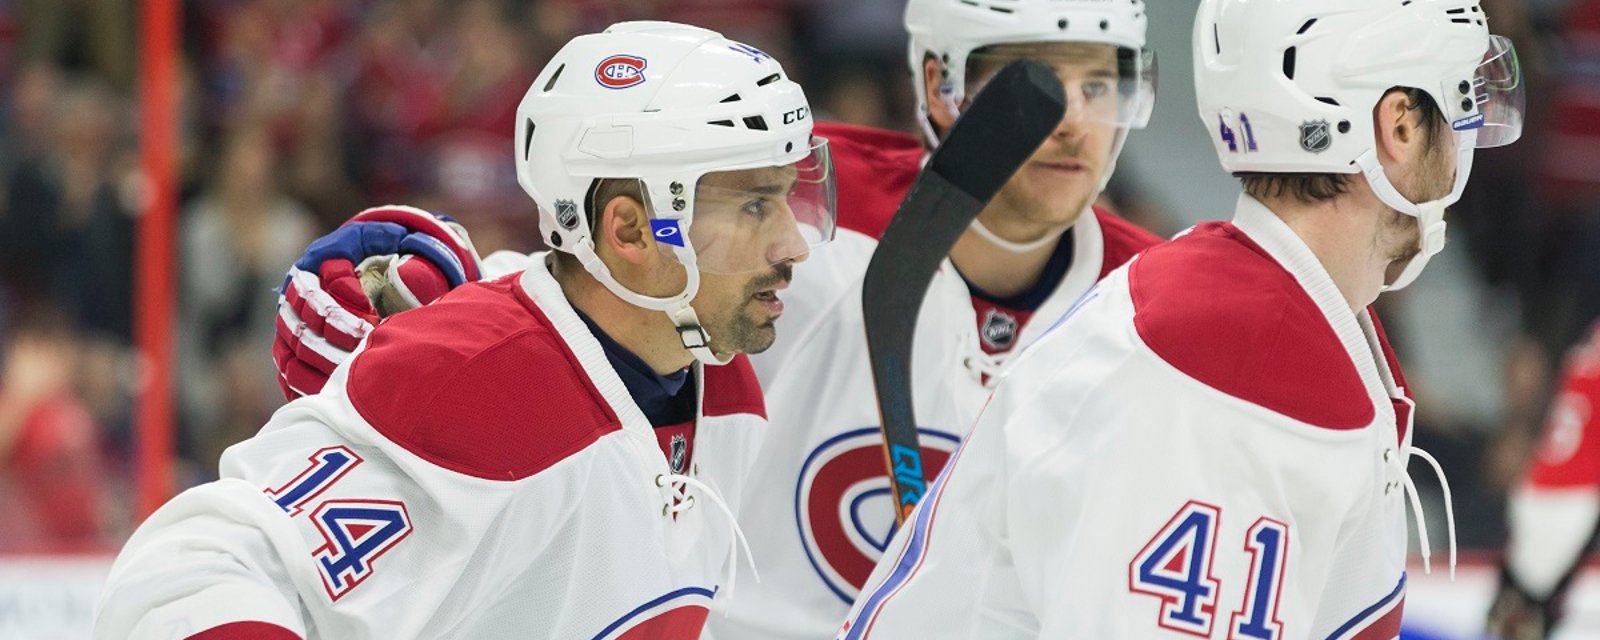 Habs longest running iron-man streak will come to an end tonight.